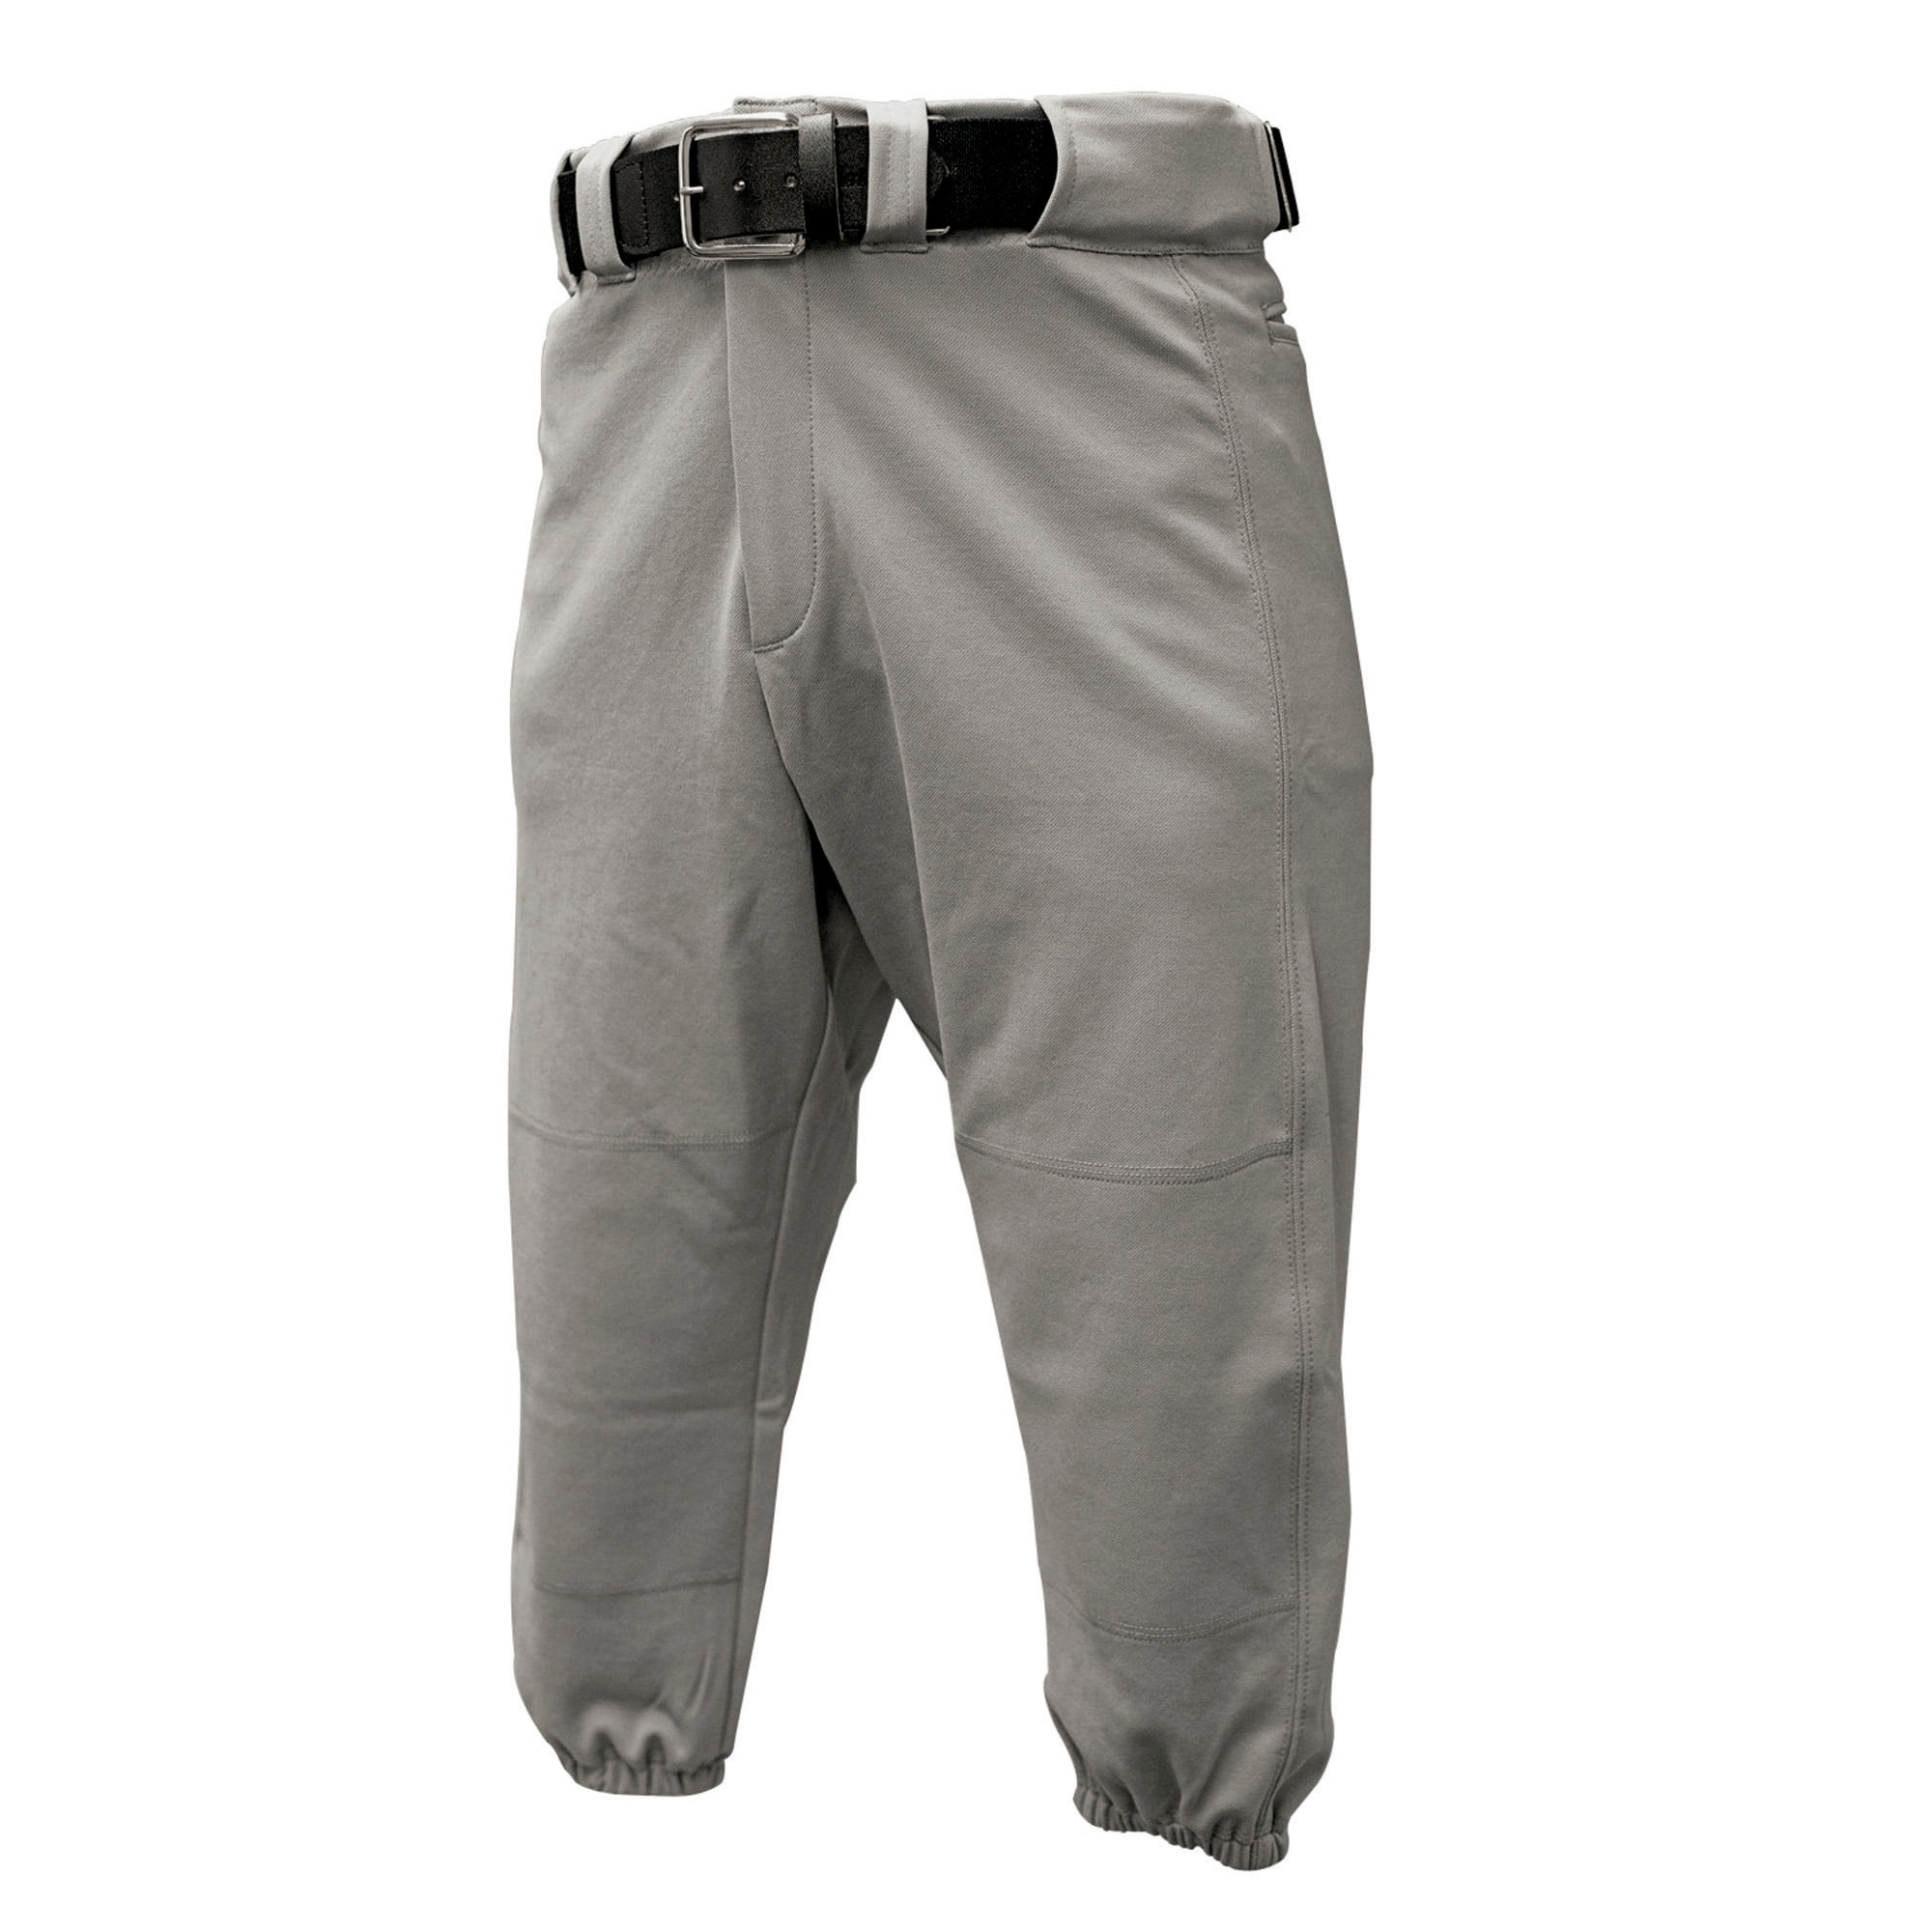 Franklin Deluxe Baseball Pants Youth X-small XS Grey Gray for sale online 